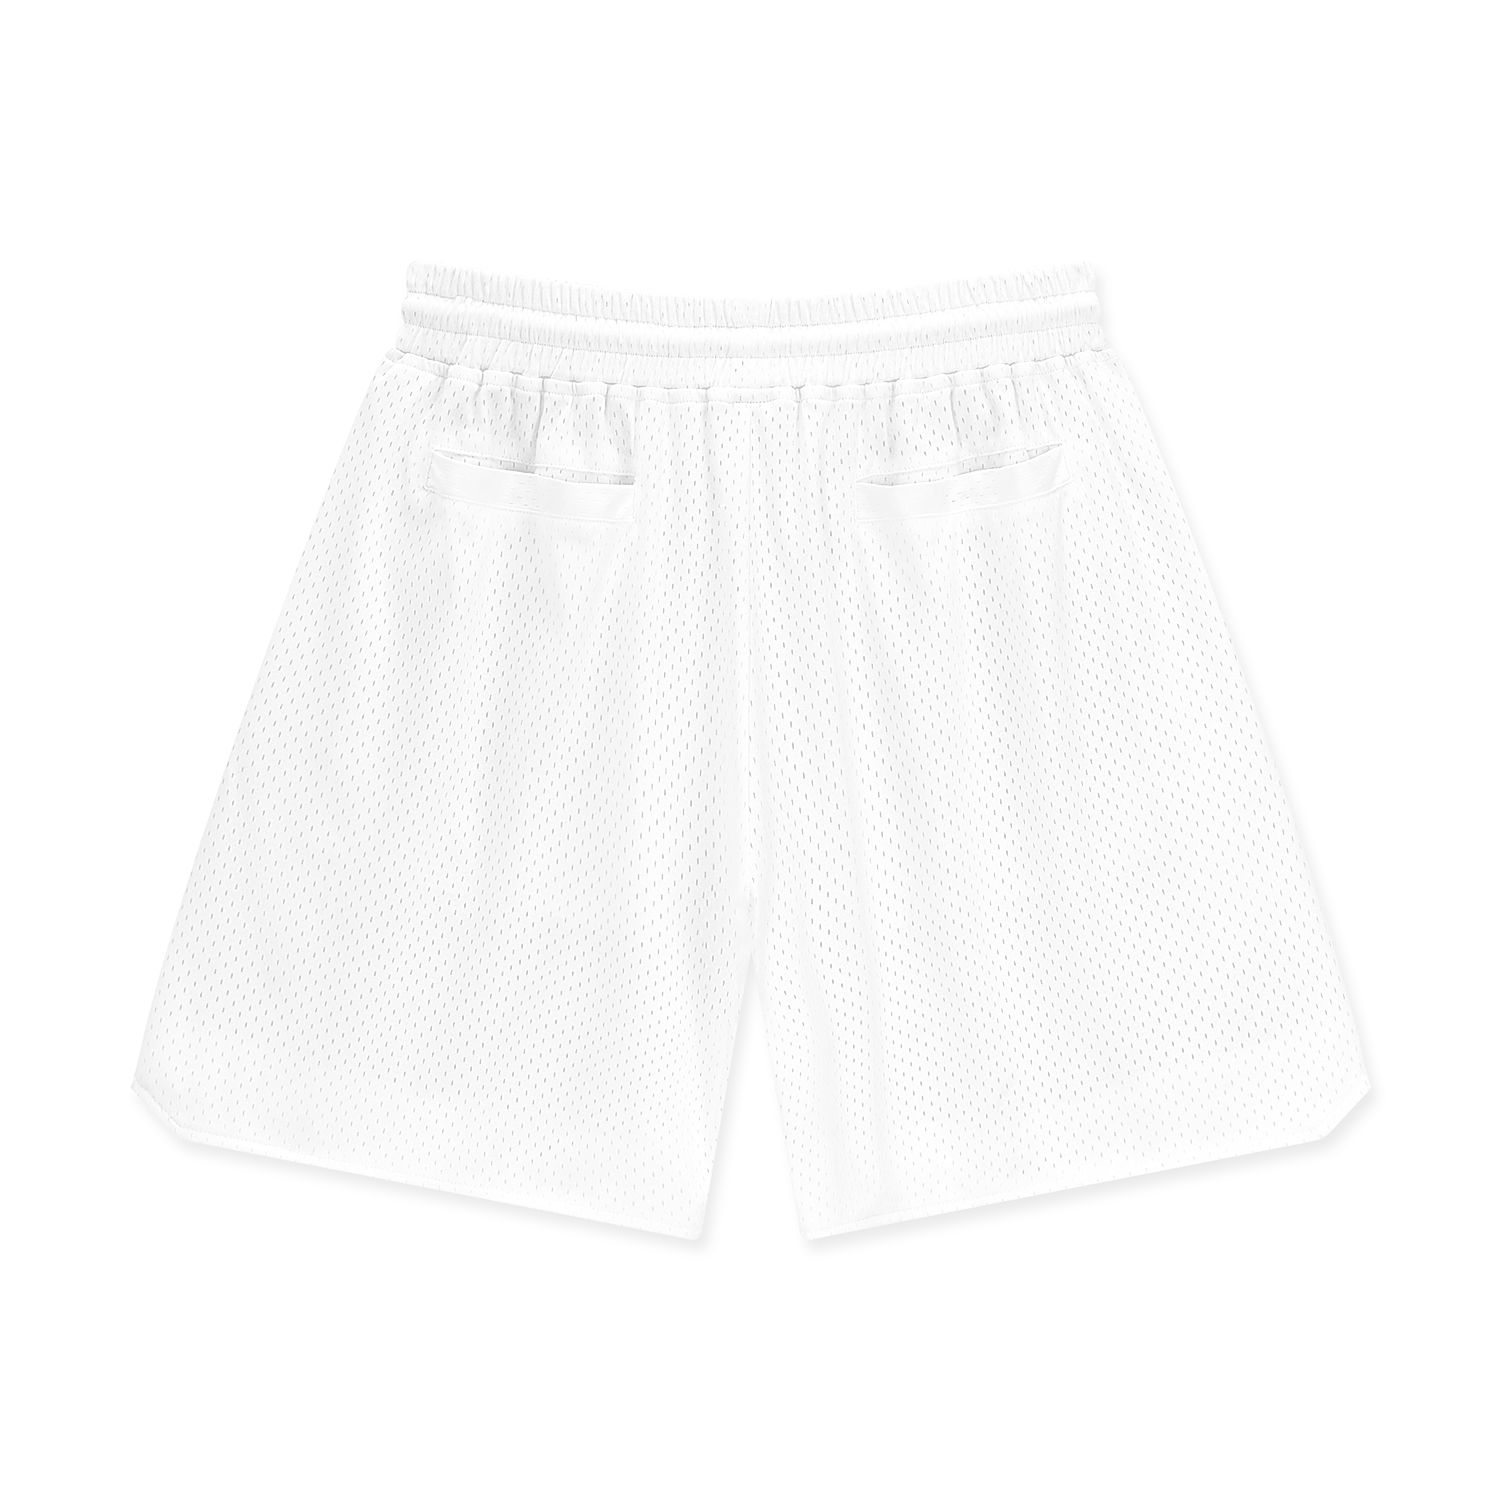 All-Over Print Men's Basketball Shorts Fast Drying | HugePOD-3